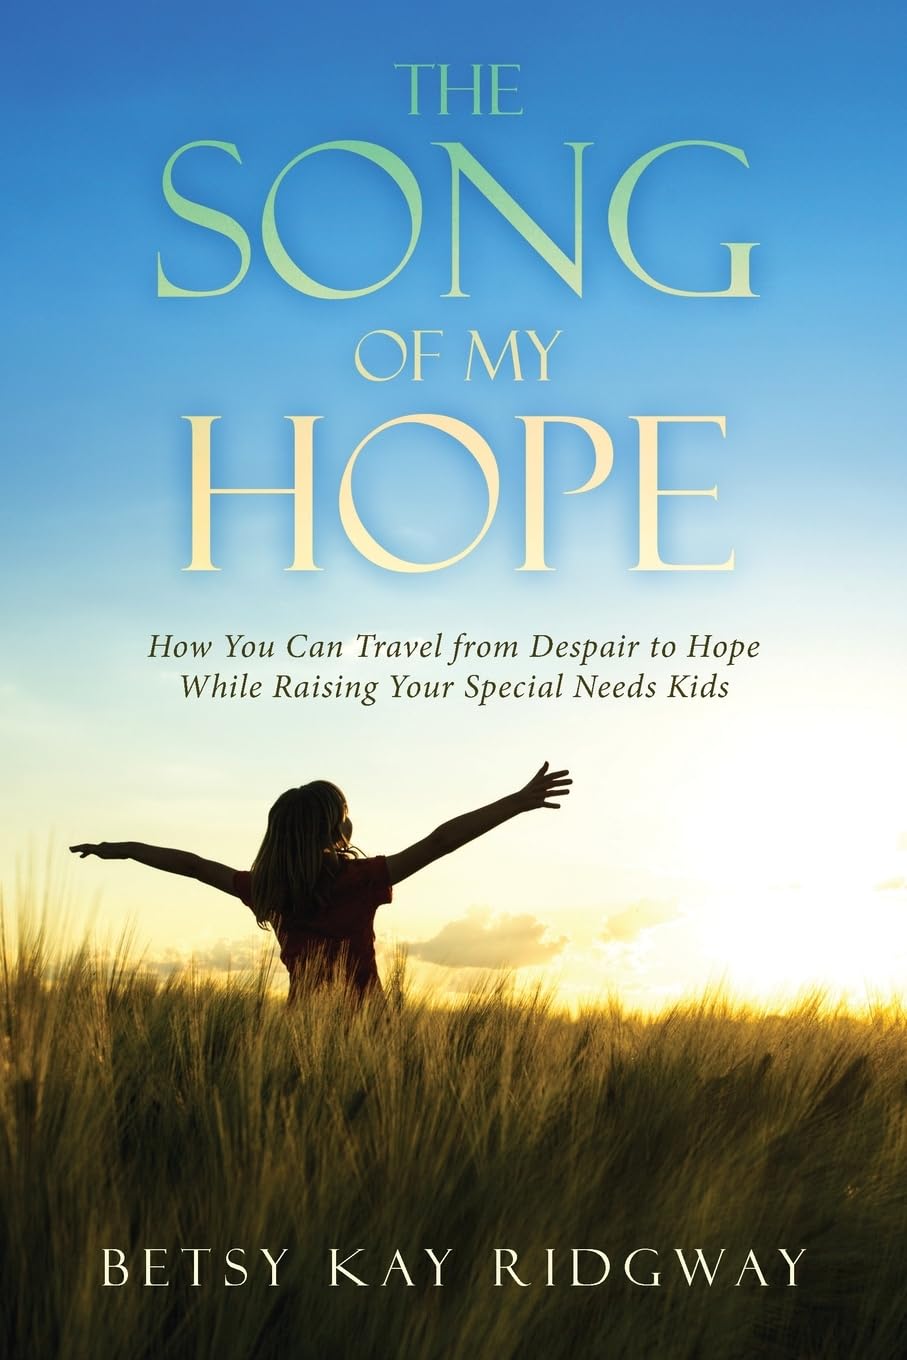 Finding Hope in the Storm: Betsy Kay Ridgway's Inspiring Tale of Parenting and Resilience